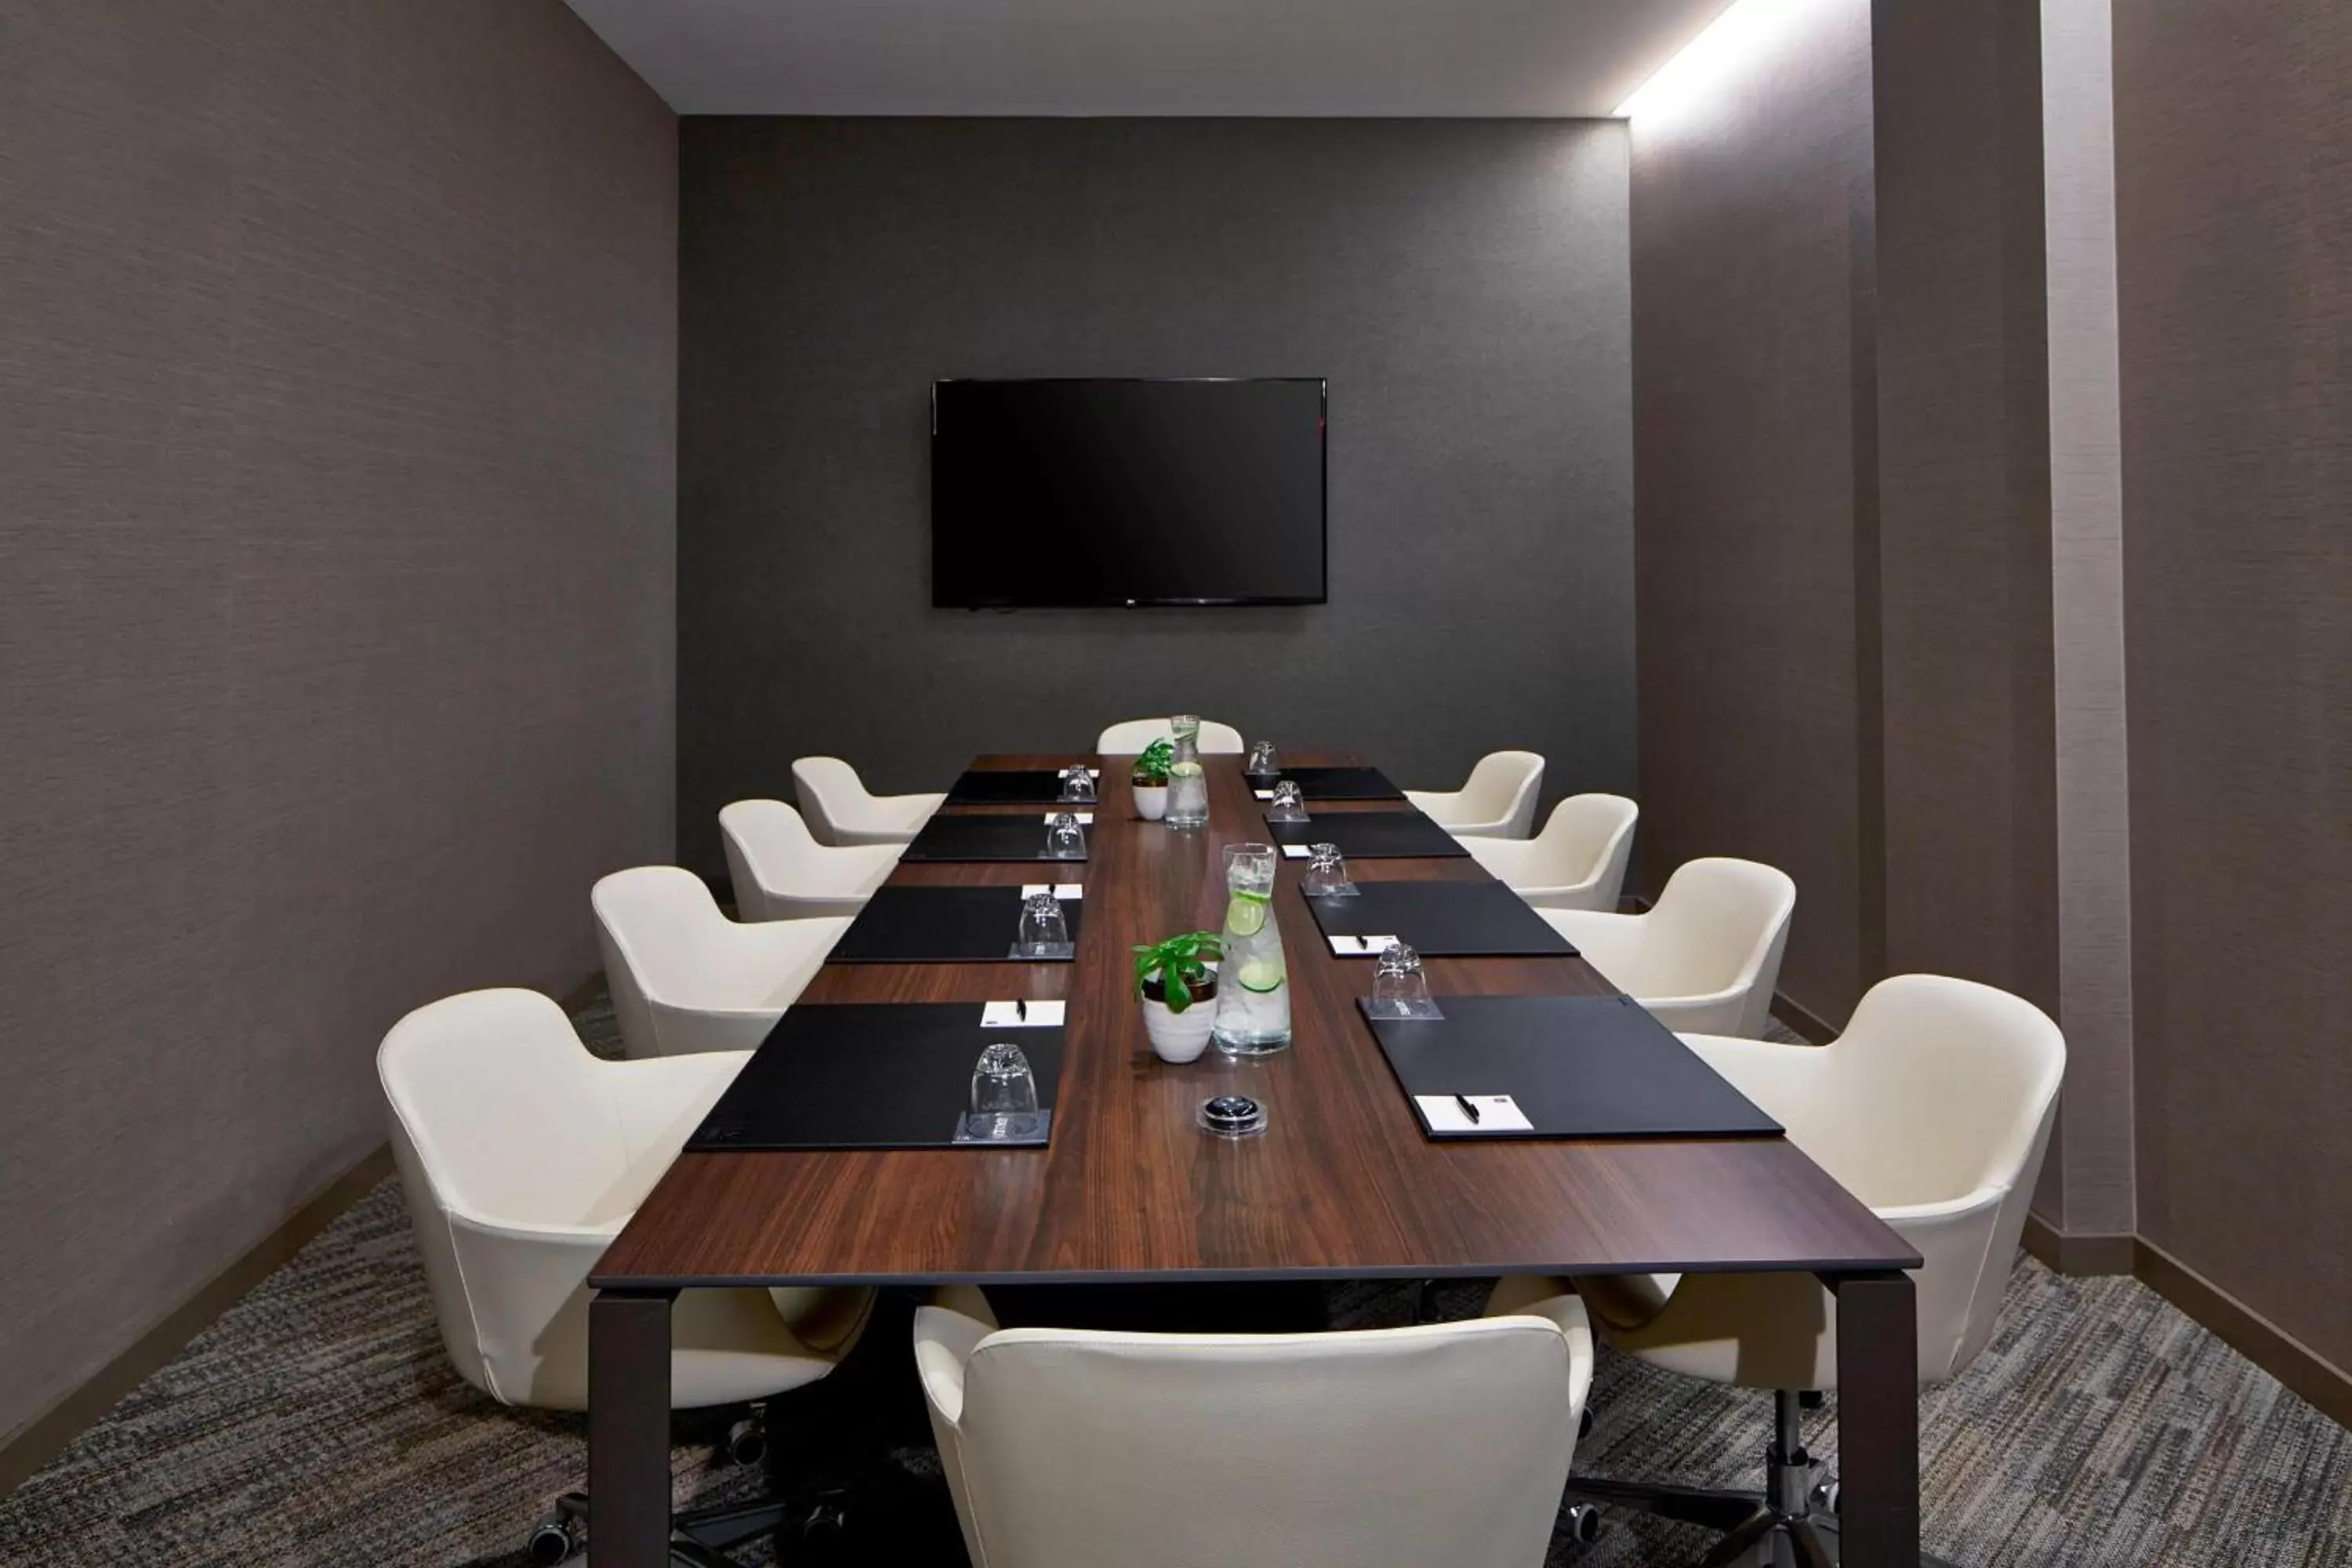 Meeting/conference room in AC Hotel by Marriott Portland Downtown, OR